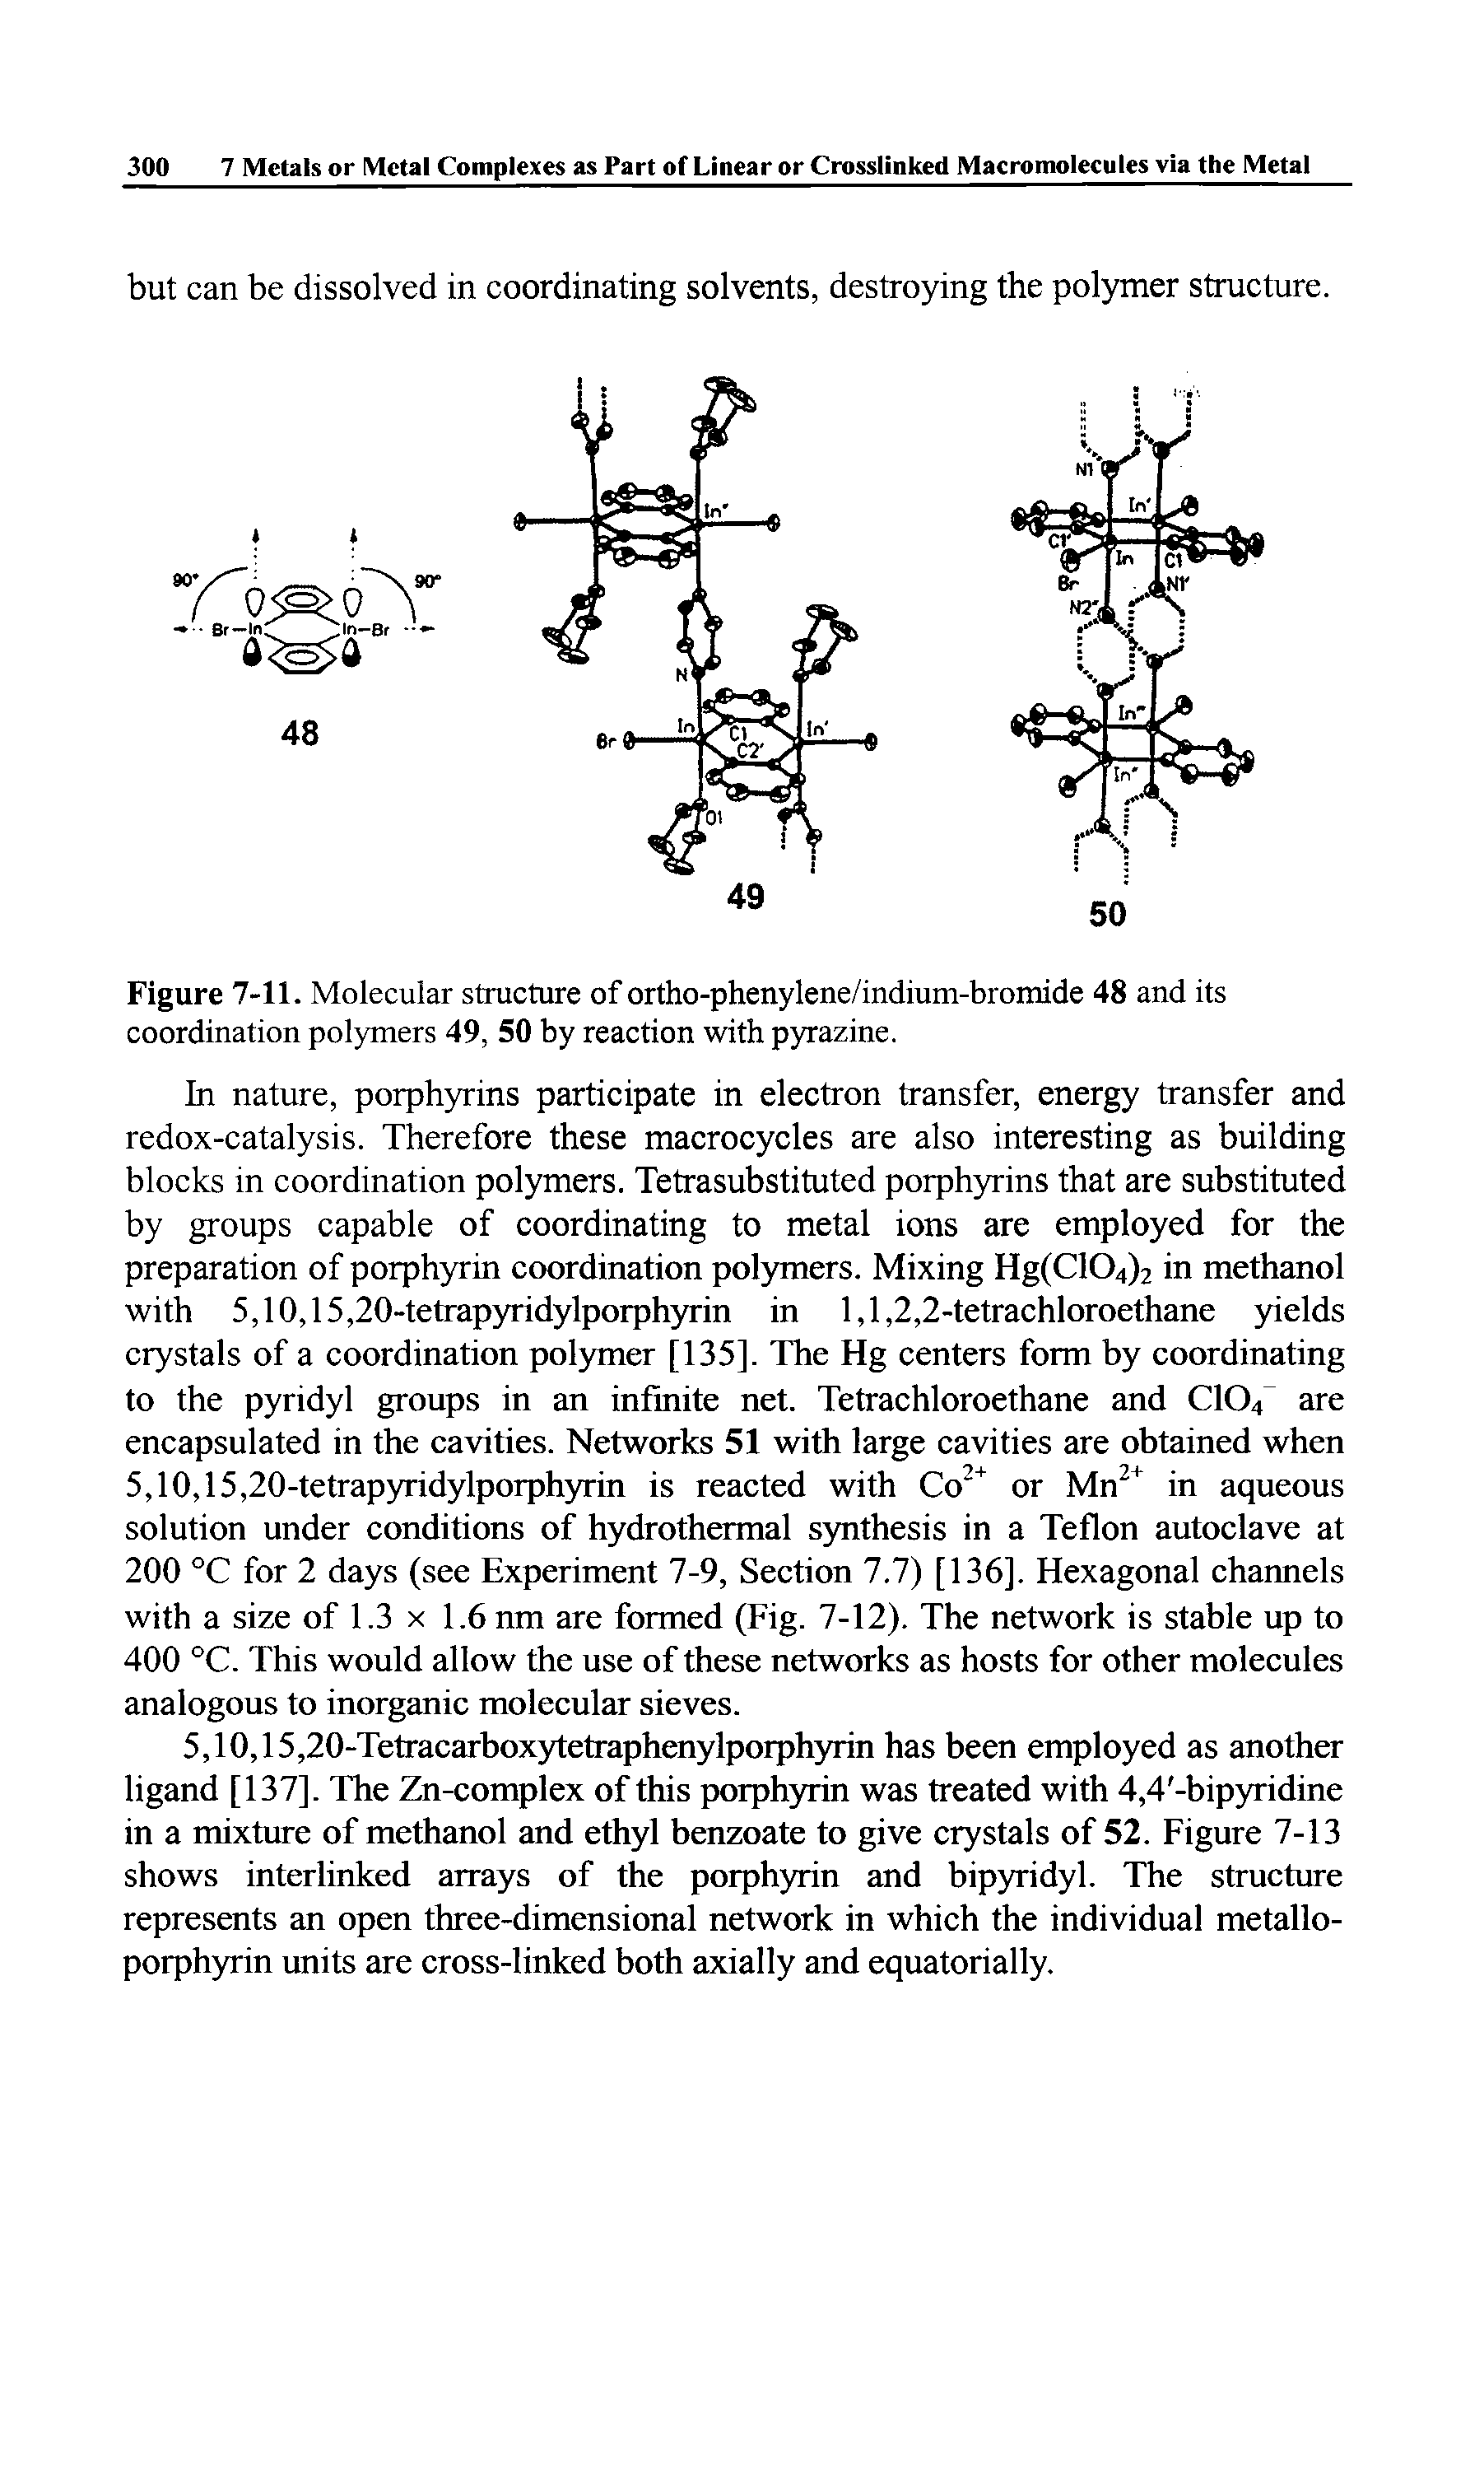 Figure 7-11. Molecular structure of ortho-phenylene/indium-bromide 48 and its coordination polymers 49, 50 by reaction with pyrazine.